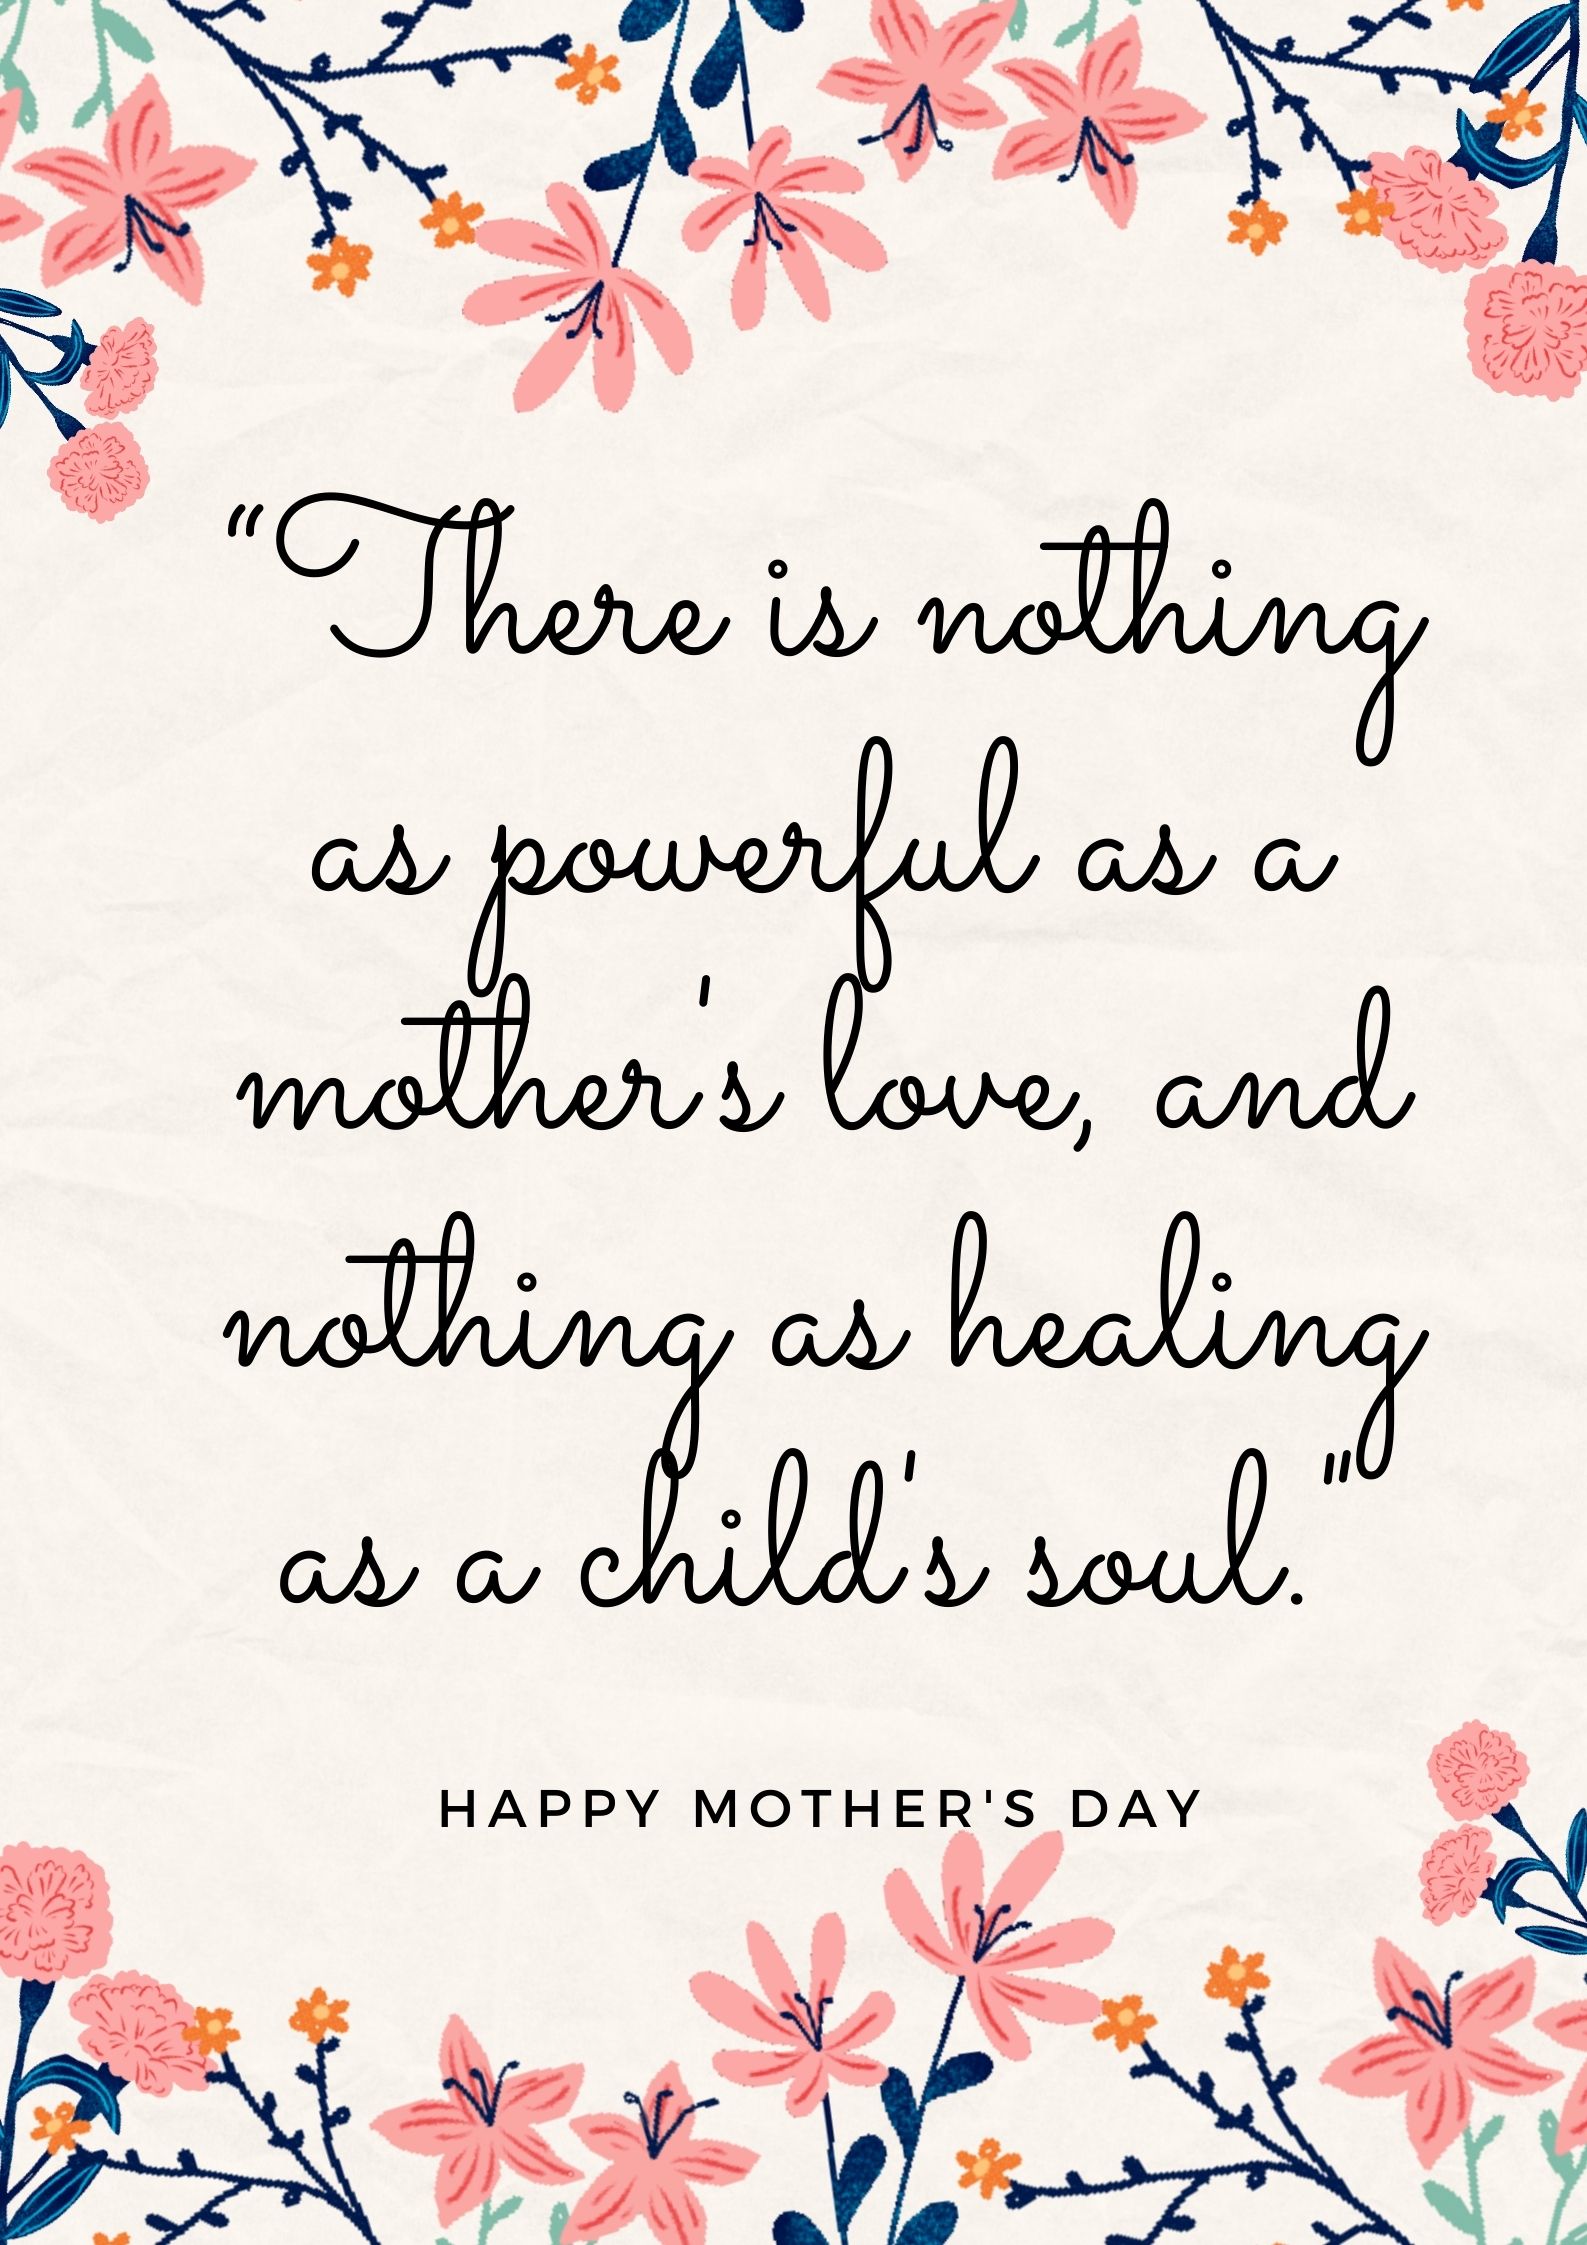 Mother's Day quotes and gifs